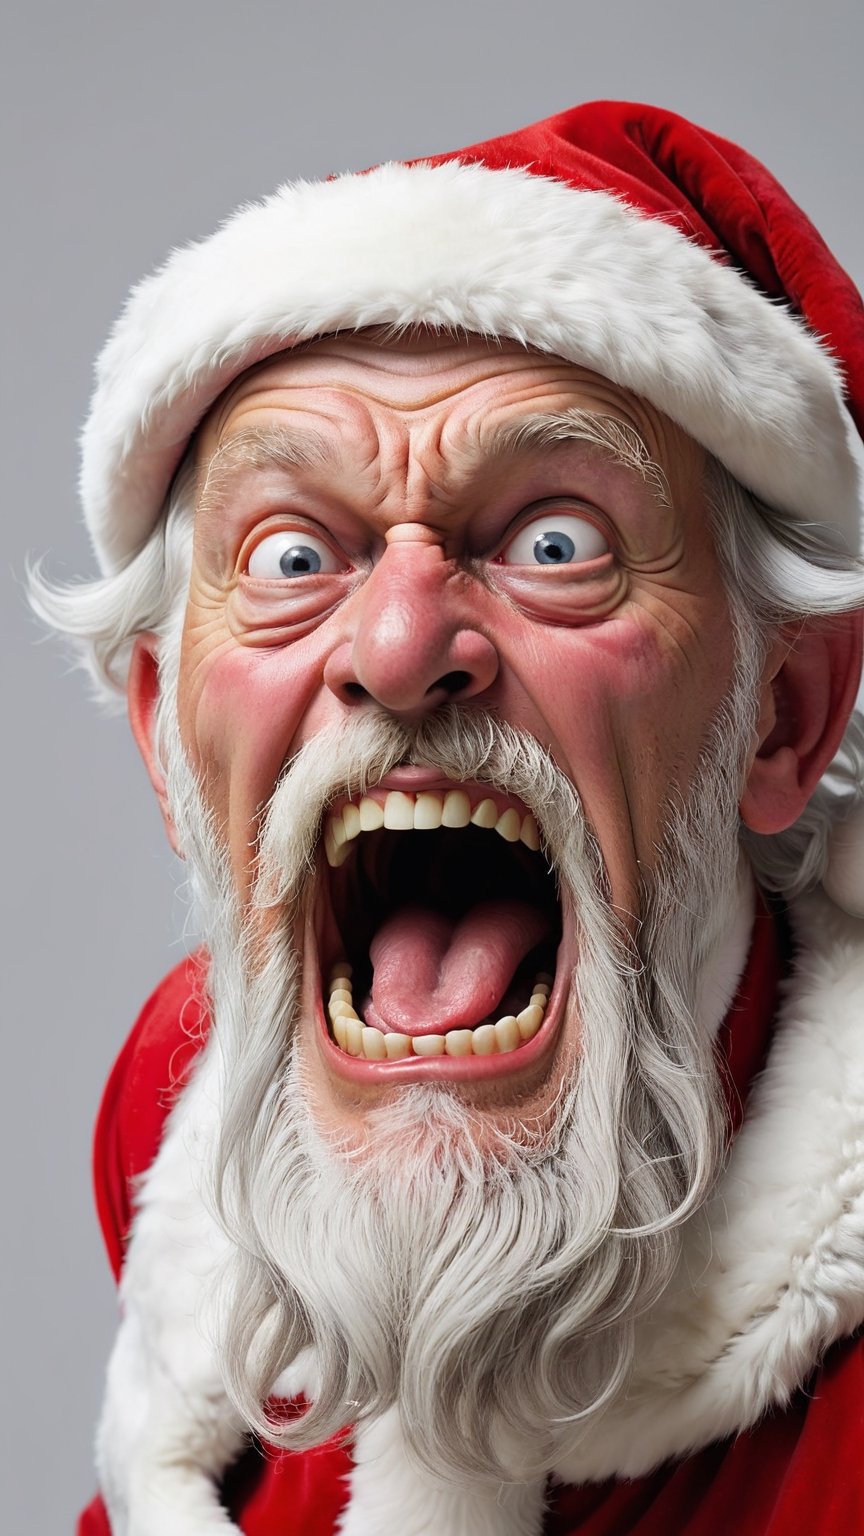 a santa claus has his mouth opened while screaming, old, old man, male focus, solo, facial hair, hat, open mouth, beard, santa hat, santa costume, gray background, simple background, white hair